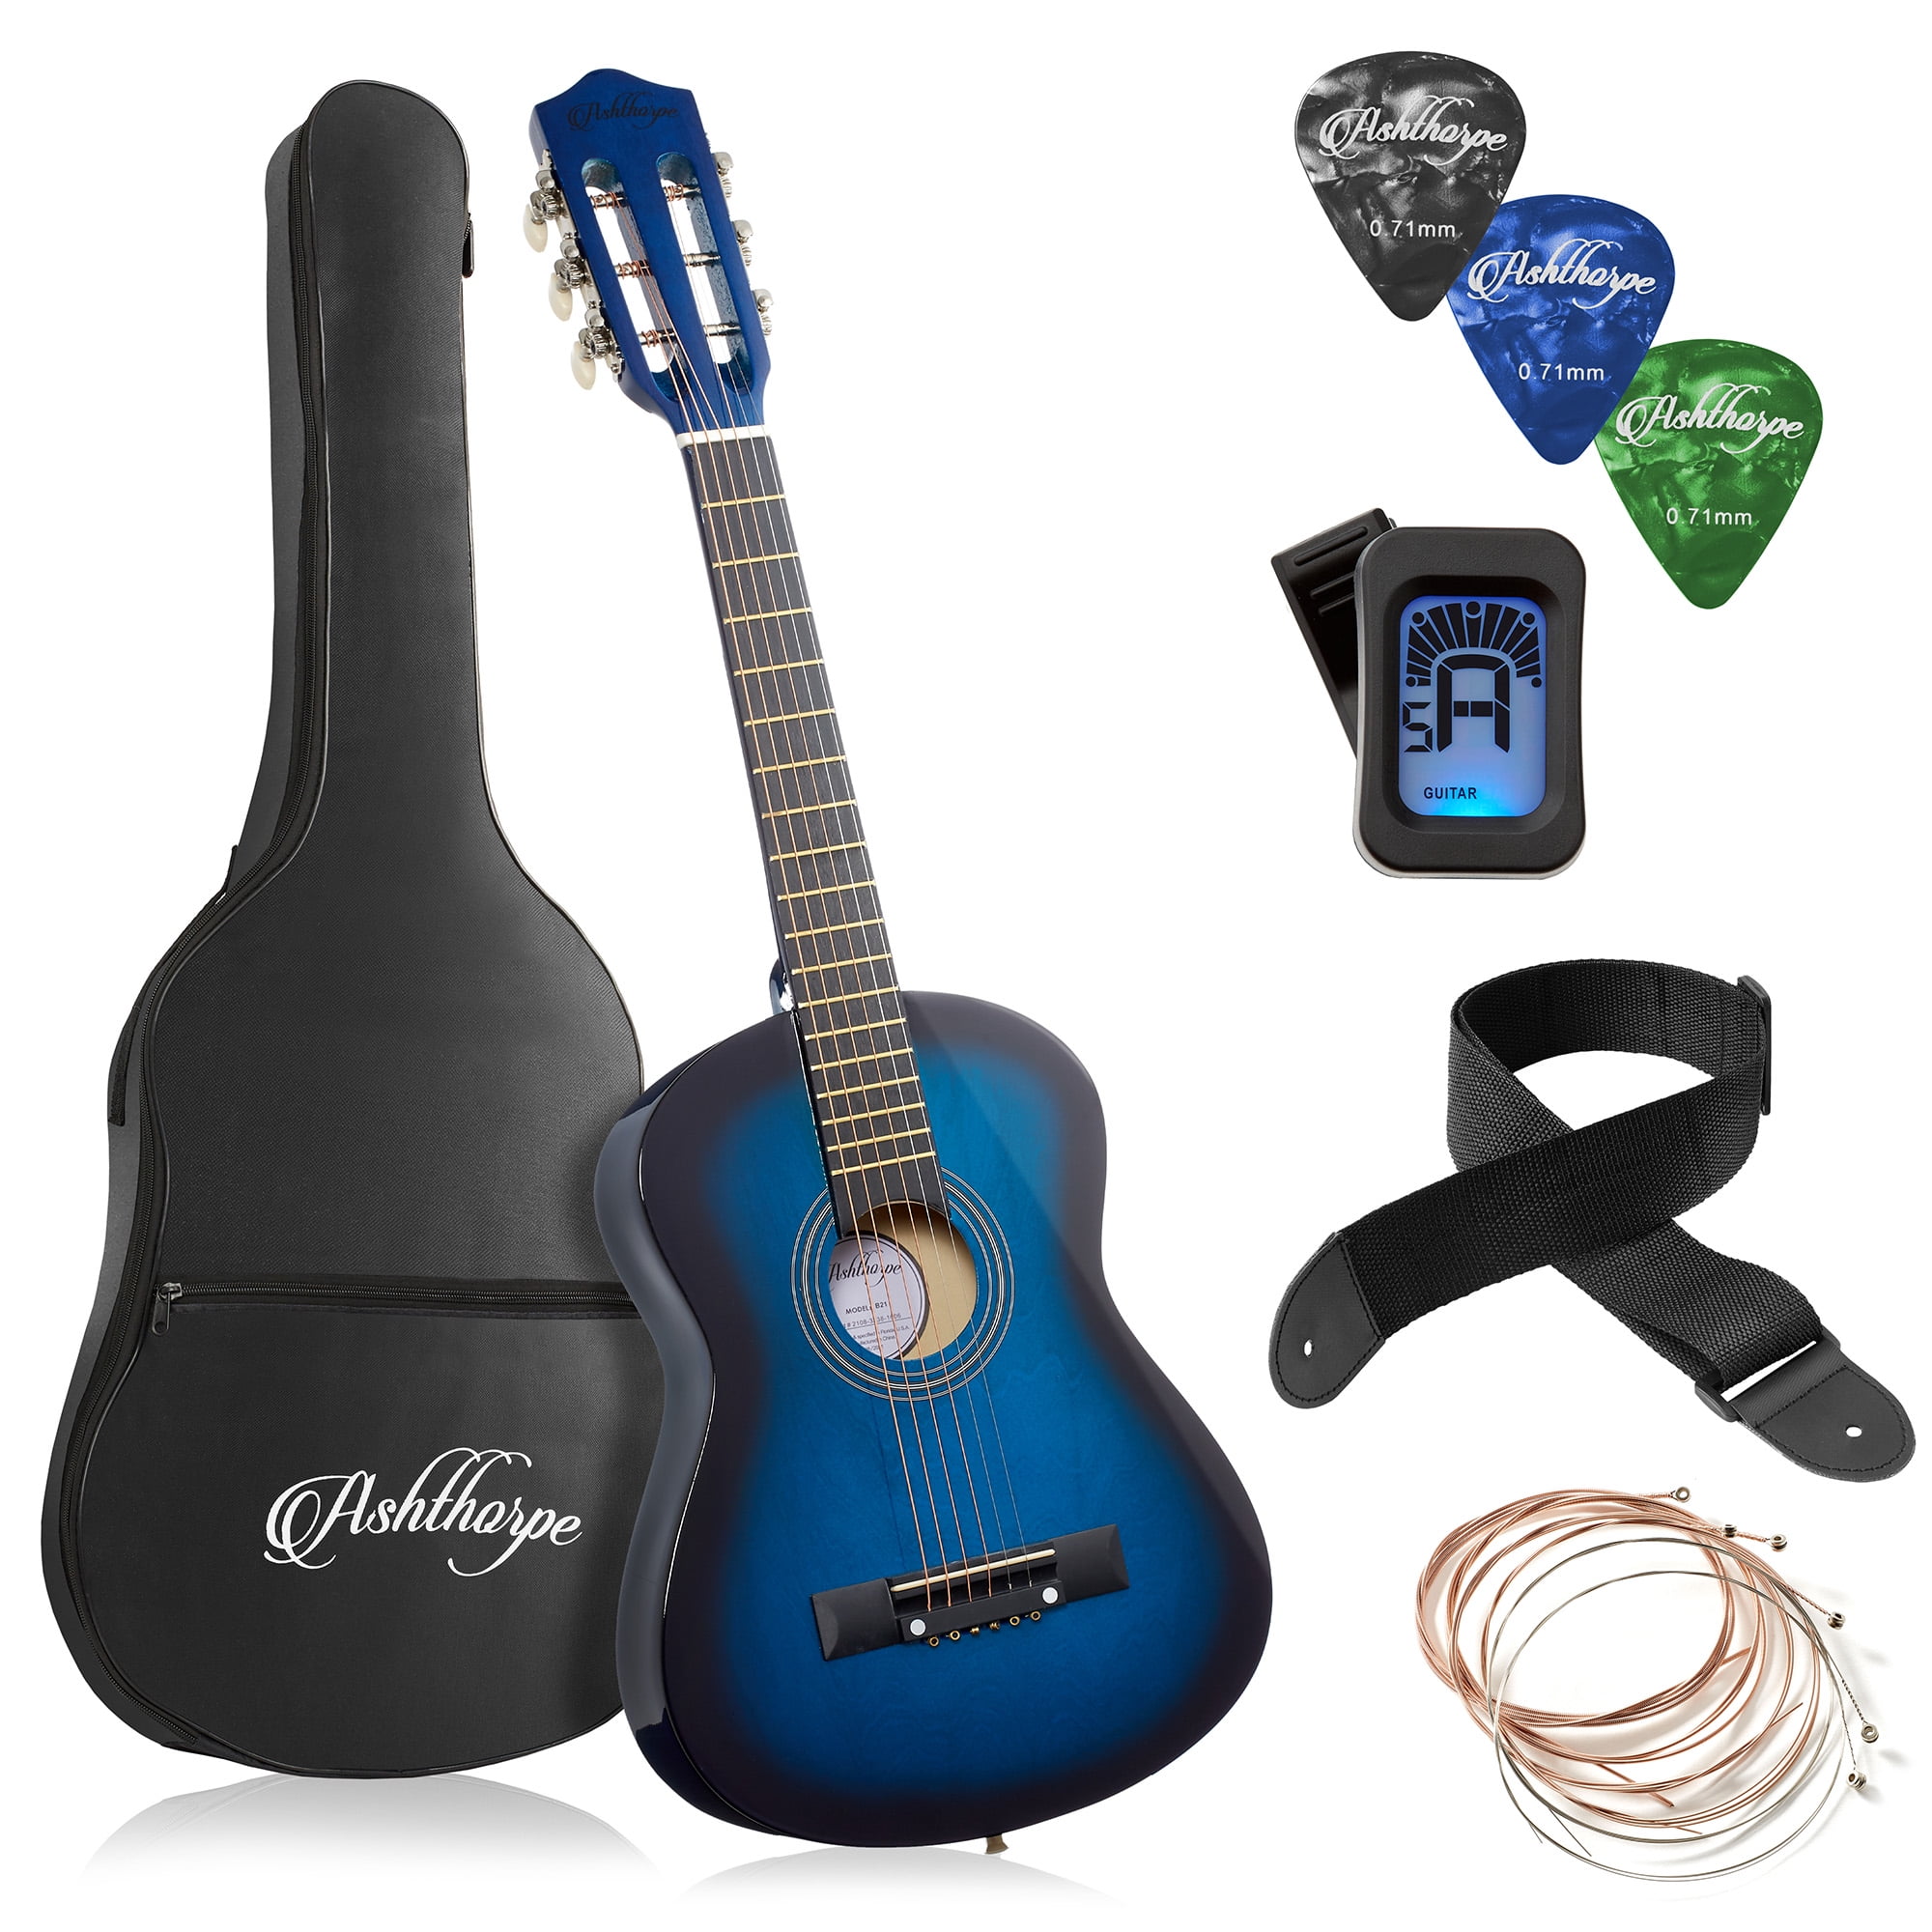 38 Left Handed Blue Wood Guitar With Case and Accessories for Kids/Boys/Teens/Beginners NEW 